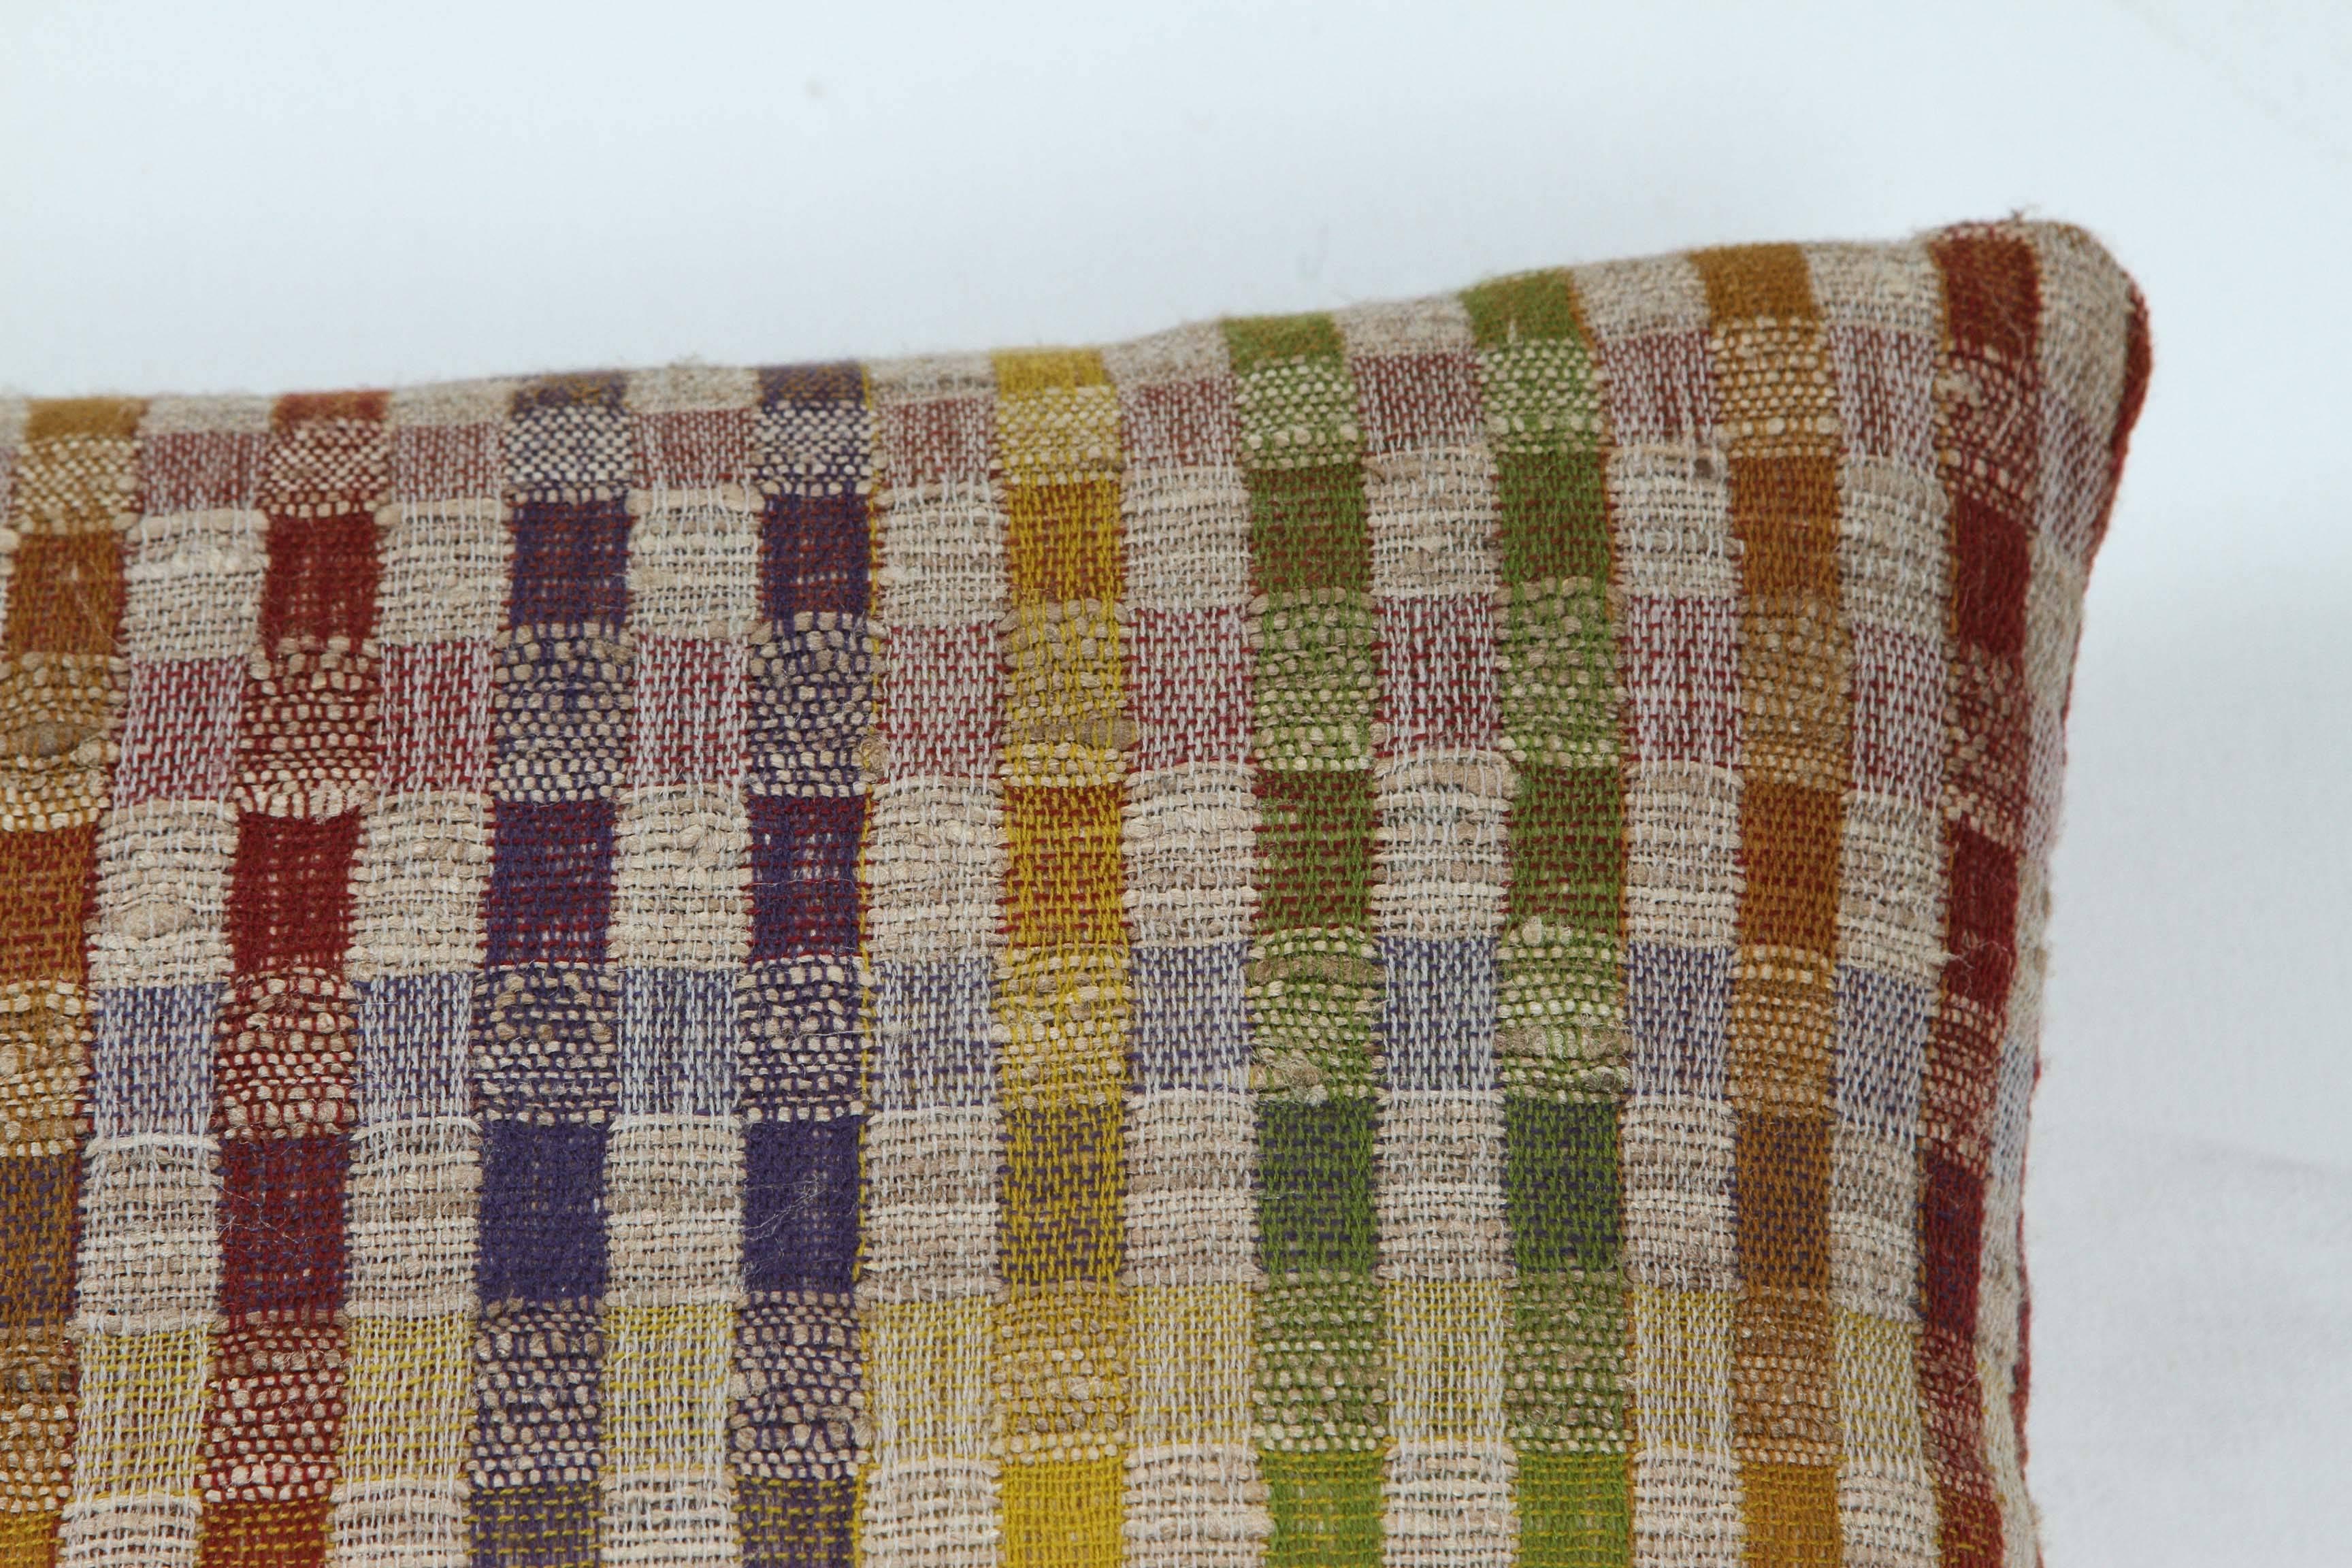 A contemporary line of cushions, pillows, throws, bedcovers, bedspreads and yardage handwoven in India on antique jacquard looms. Handspun wool, cotton, linen, and raw silk give the textiles an appealing uneven quality.

This wool and raw tussar